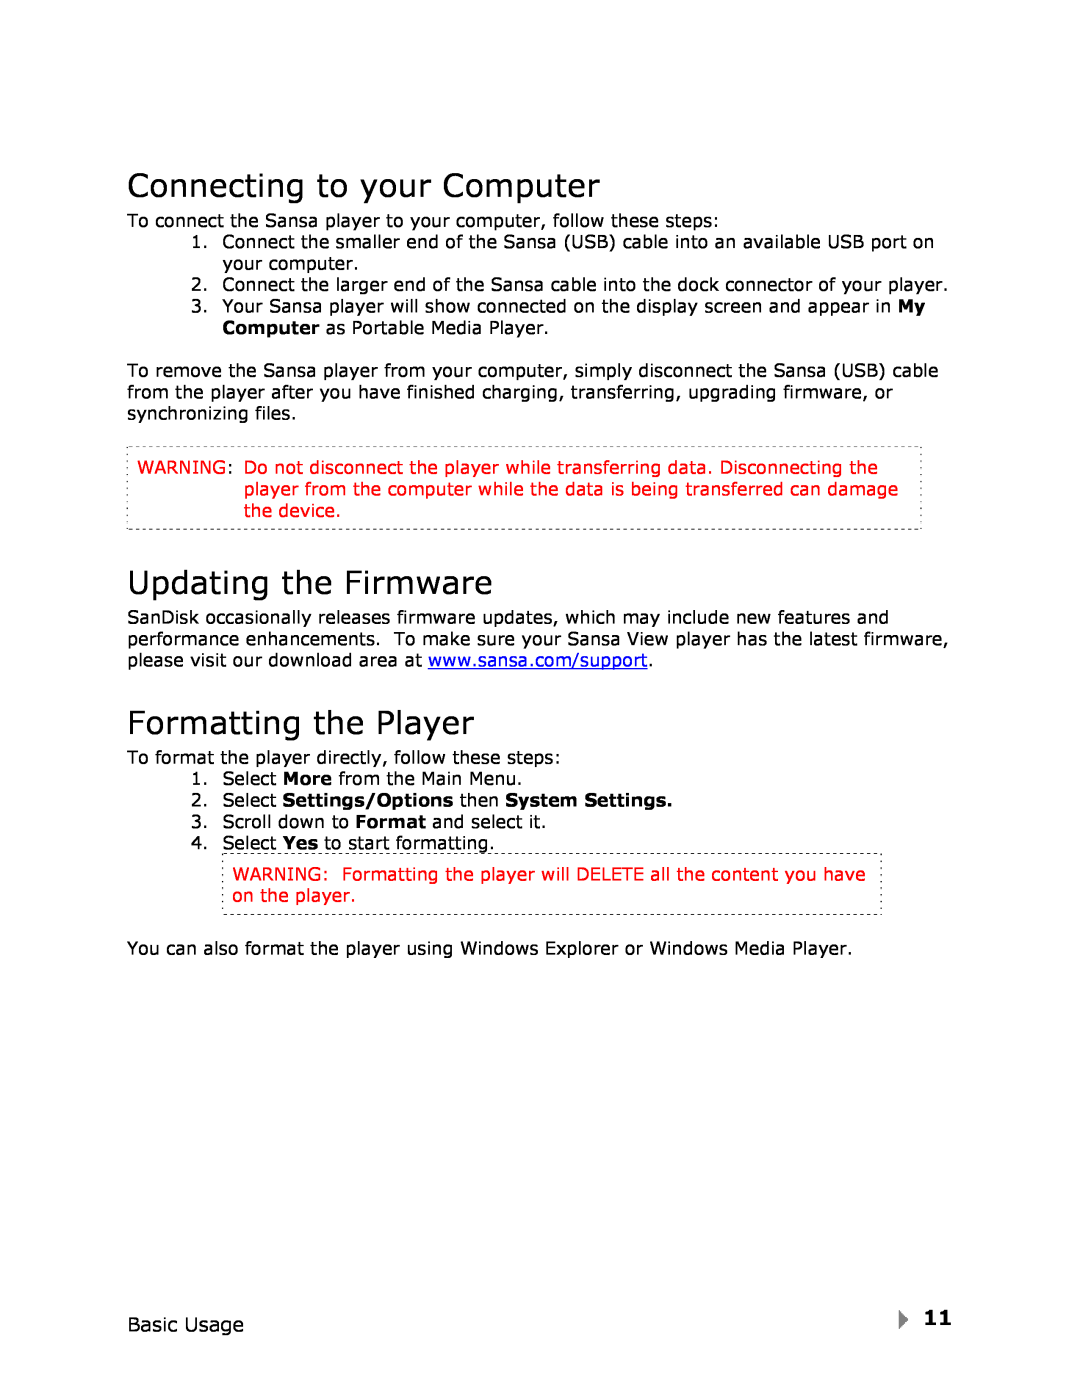 SanDisk View user manual Connecting to your Computer, Updating the Firmware, Formatting the Player 